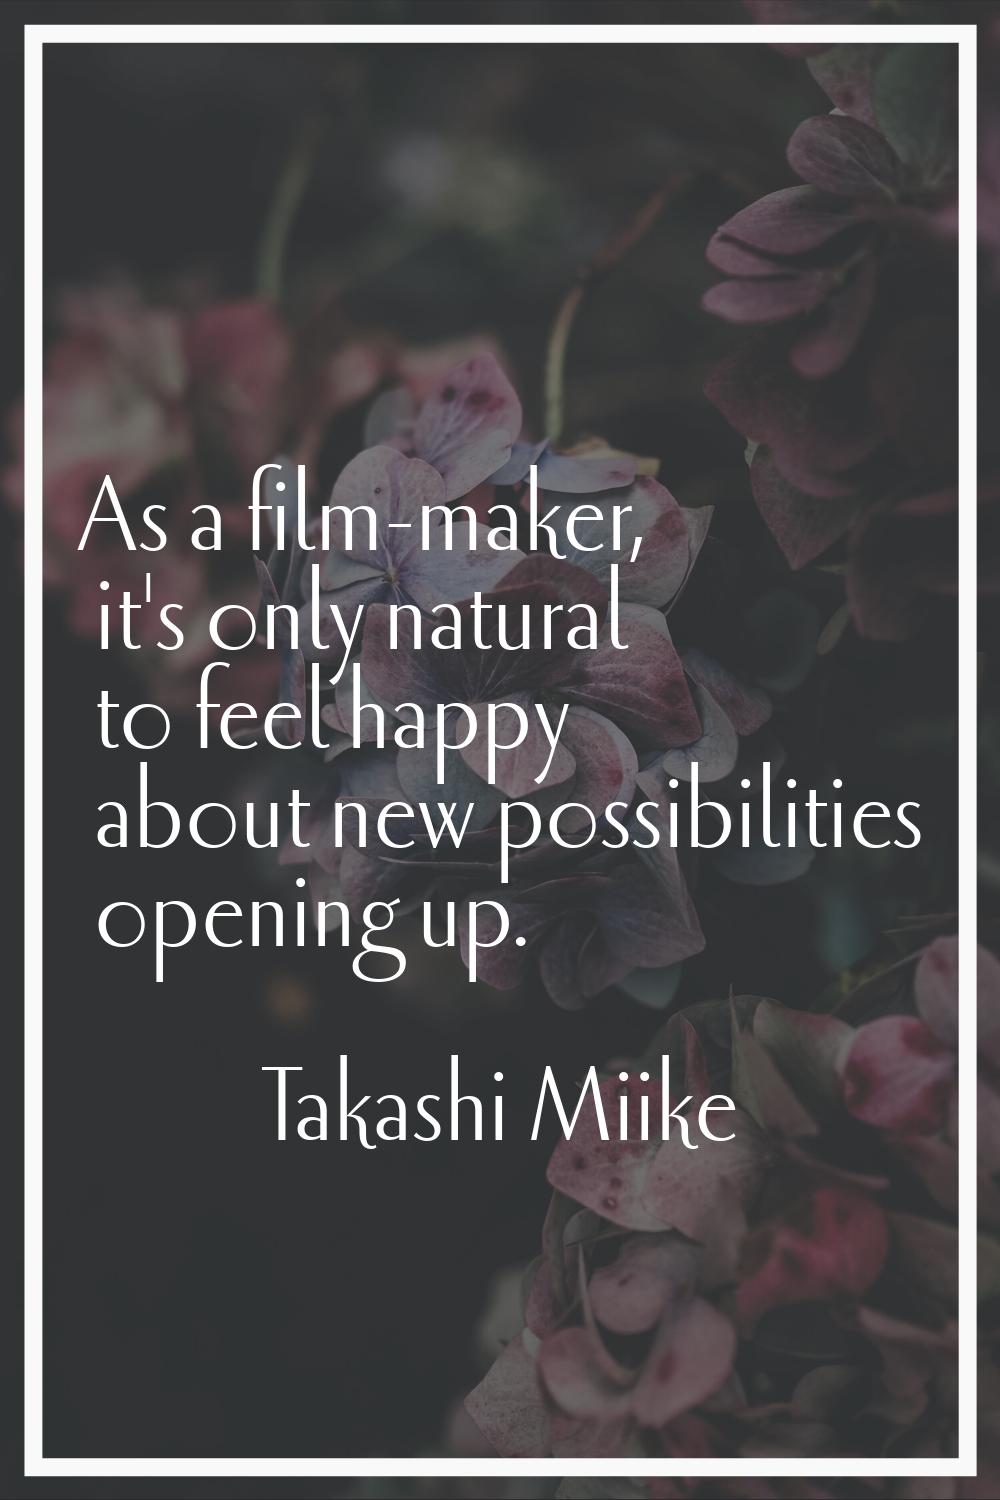 As a film-maker, it's only natural to feel happy about new possibilities opening up.